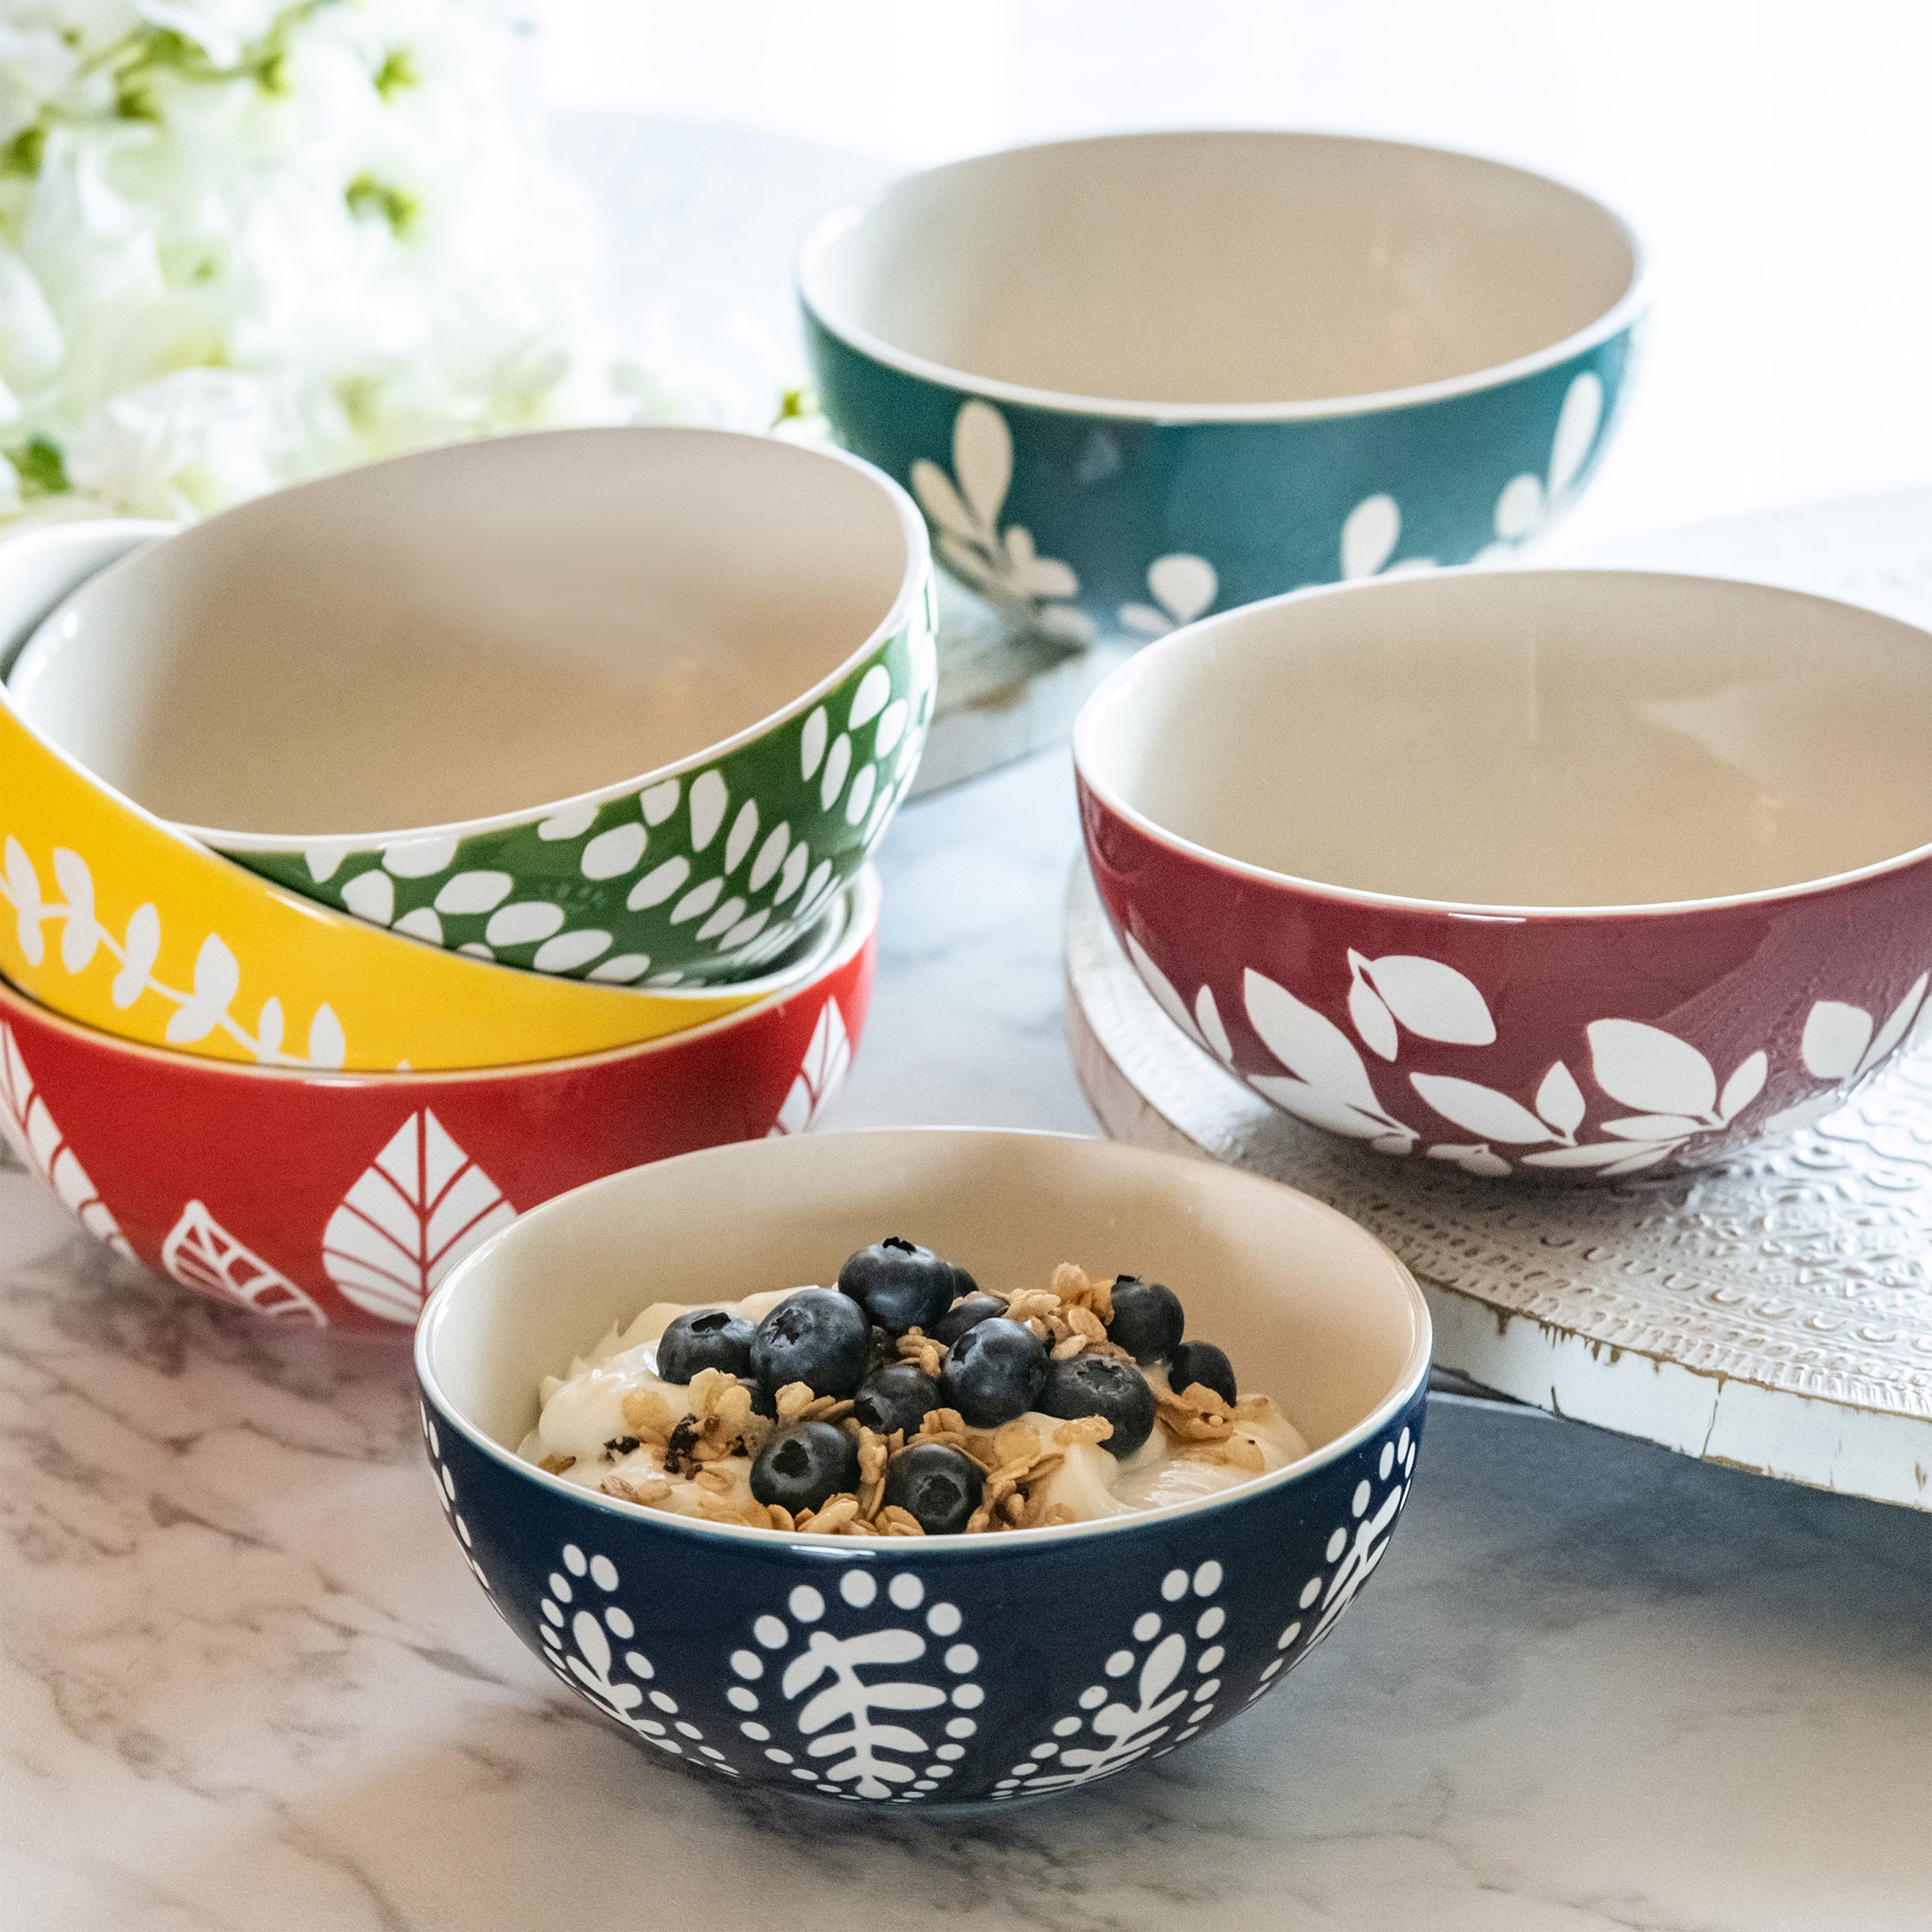 Signature 6-Piece Stoneware Bowl Set with Vented Lids Dishwasher & Microwave